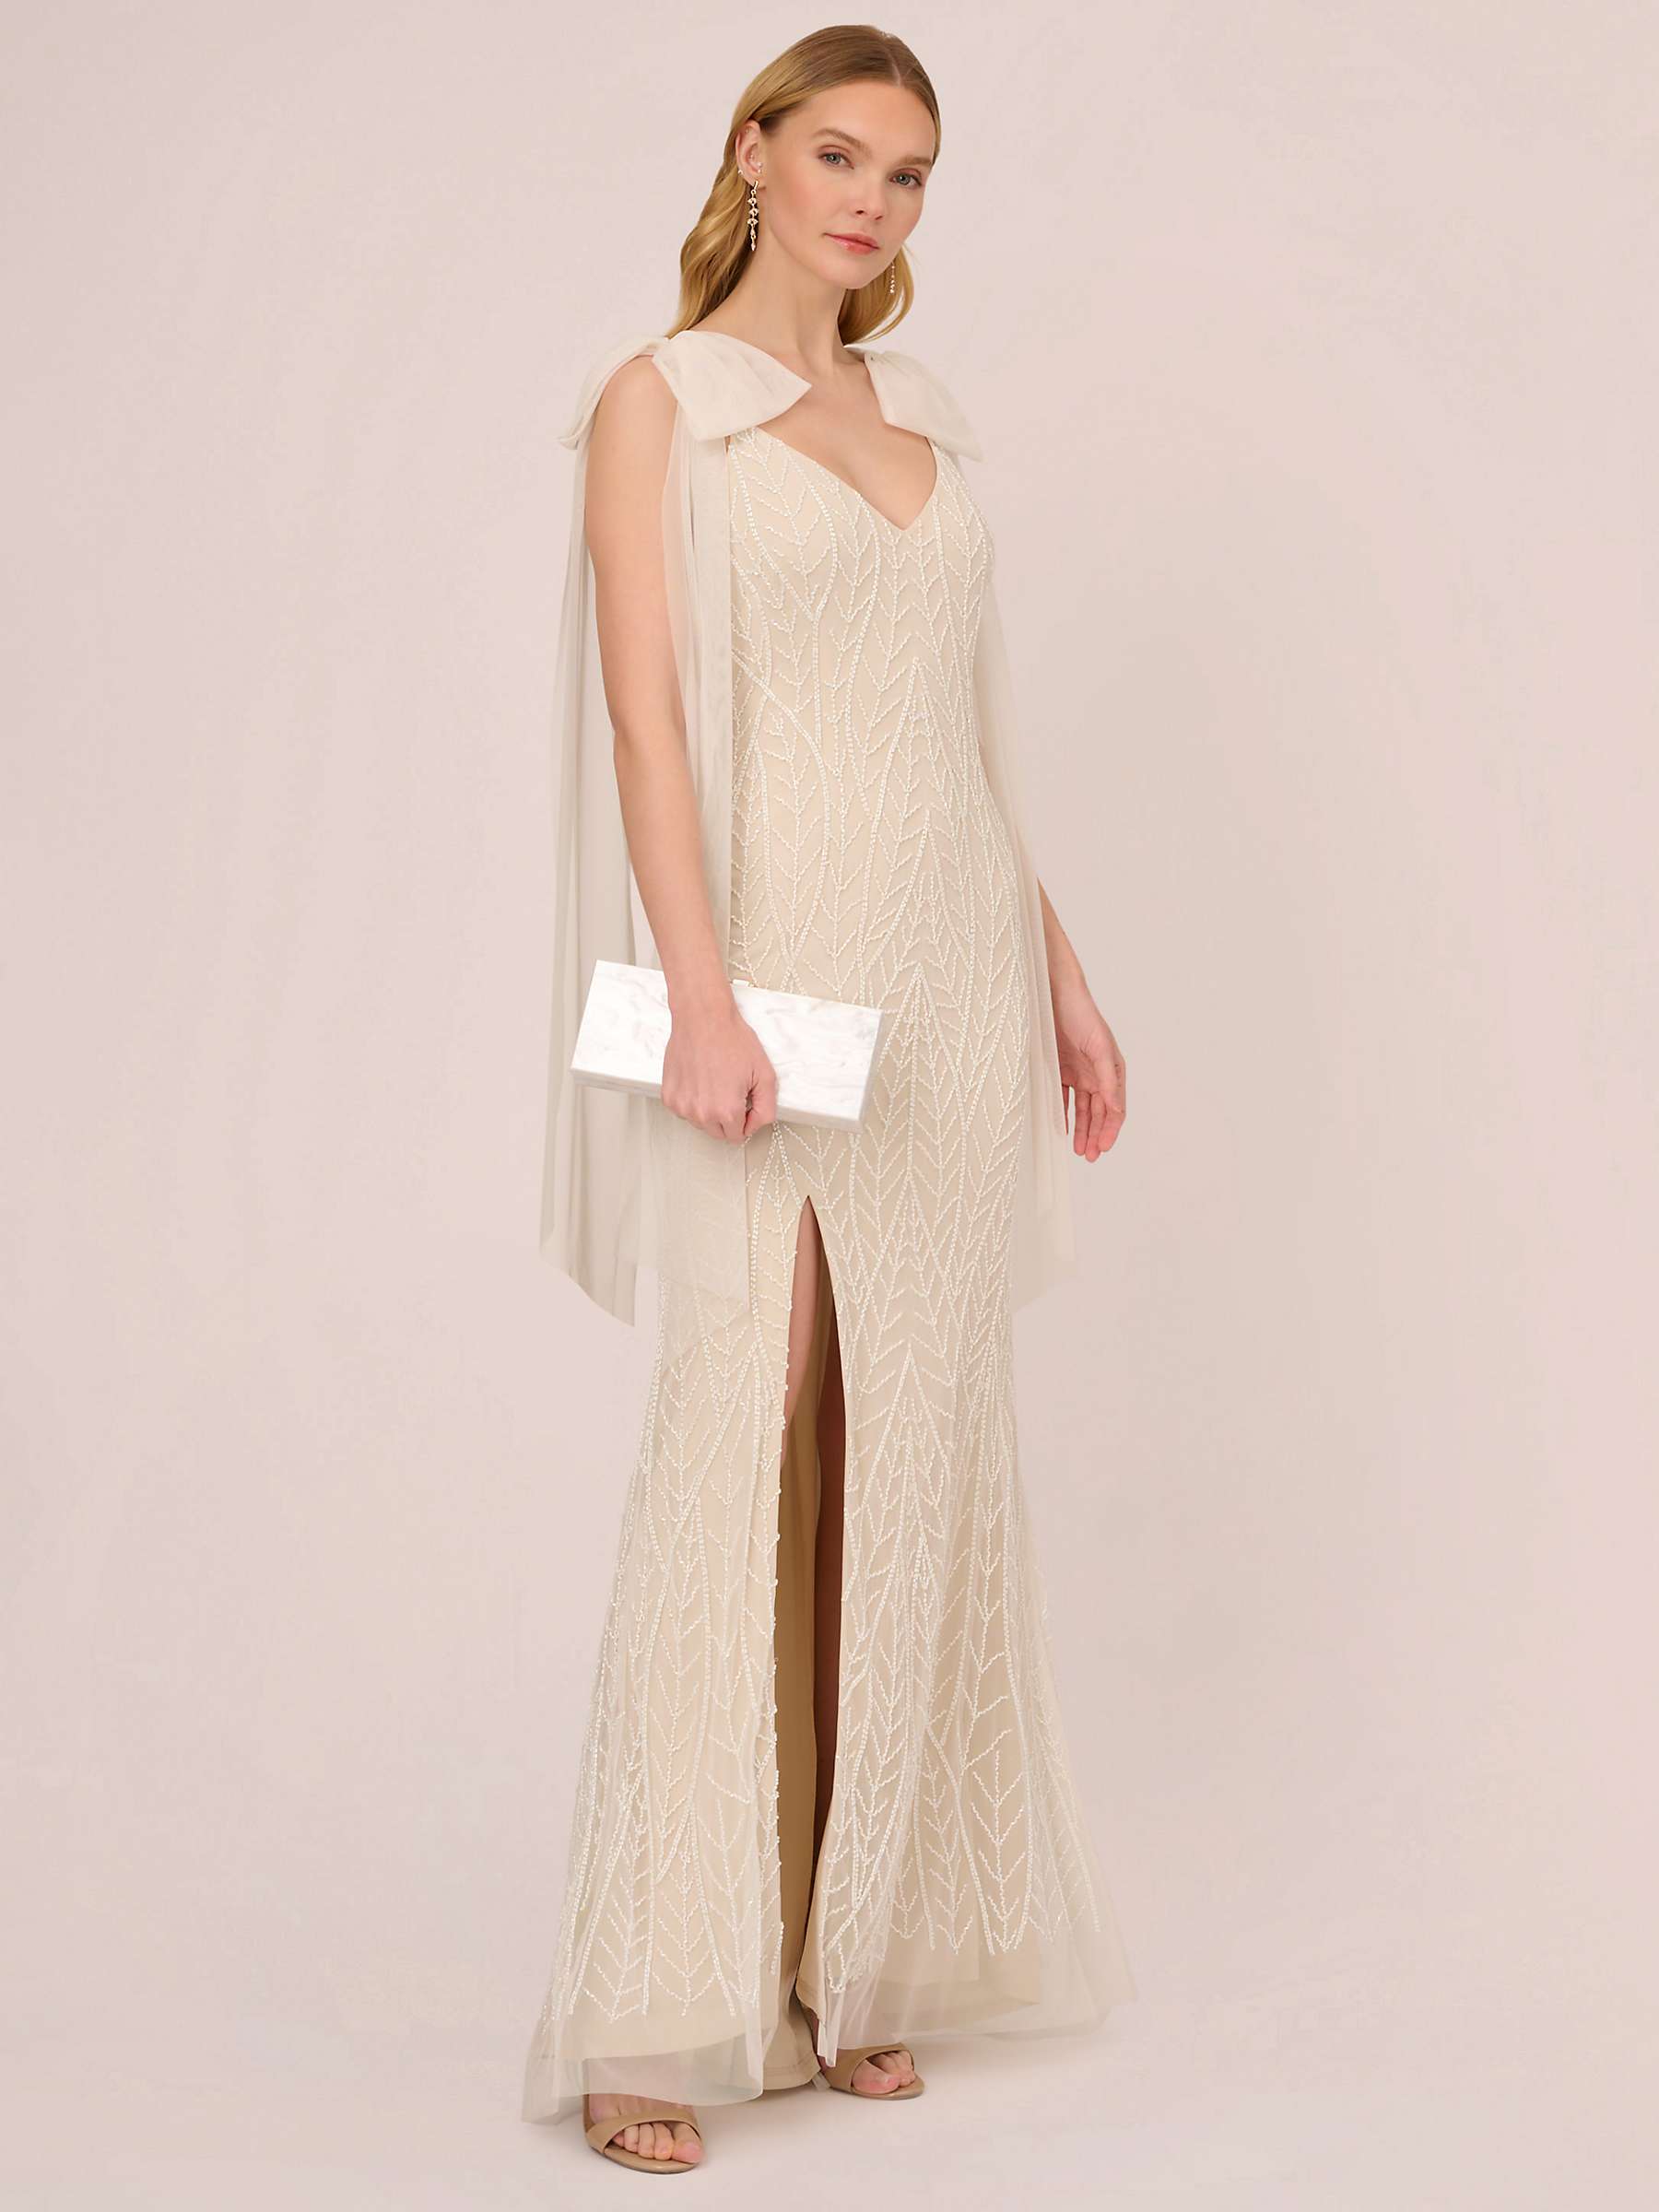 Buy Adrianna Papell Leaf Beaded Long Dress, Ivory/Pearl Online at johnlewis.com